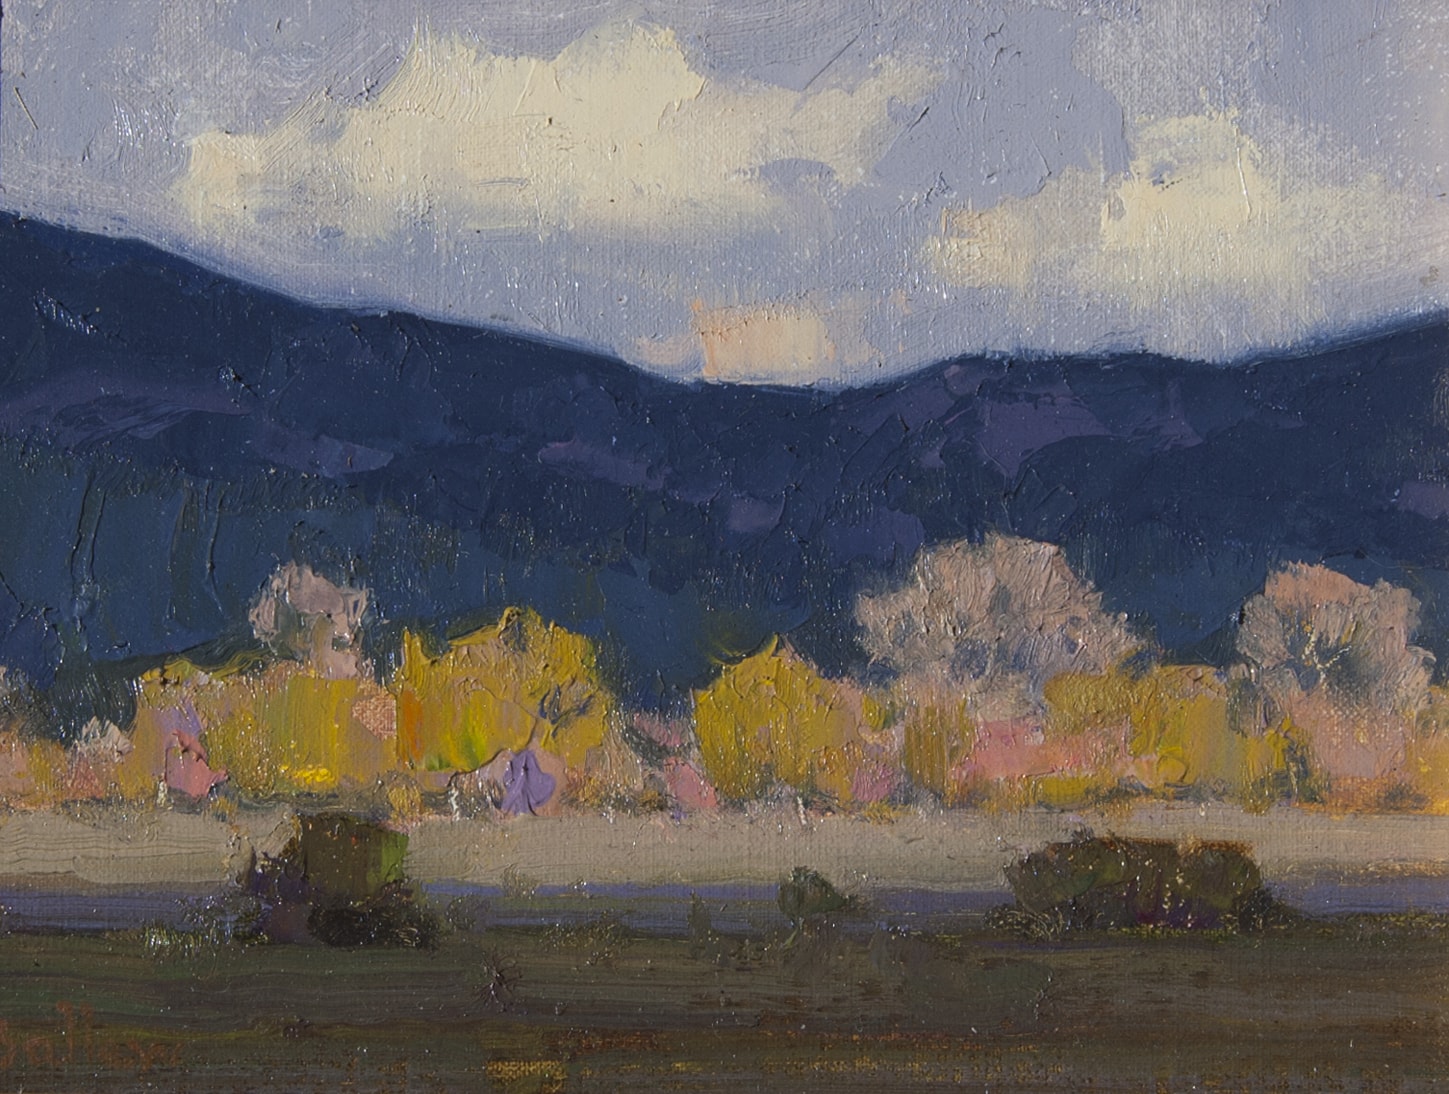 Sunlight and Shadow, Taos painting by David Ballew